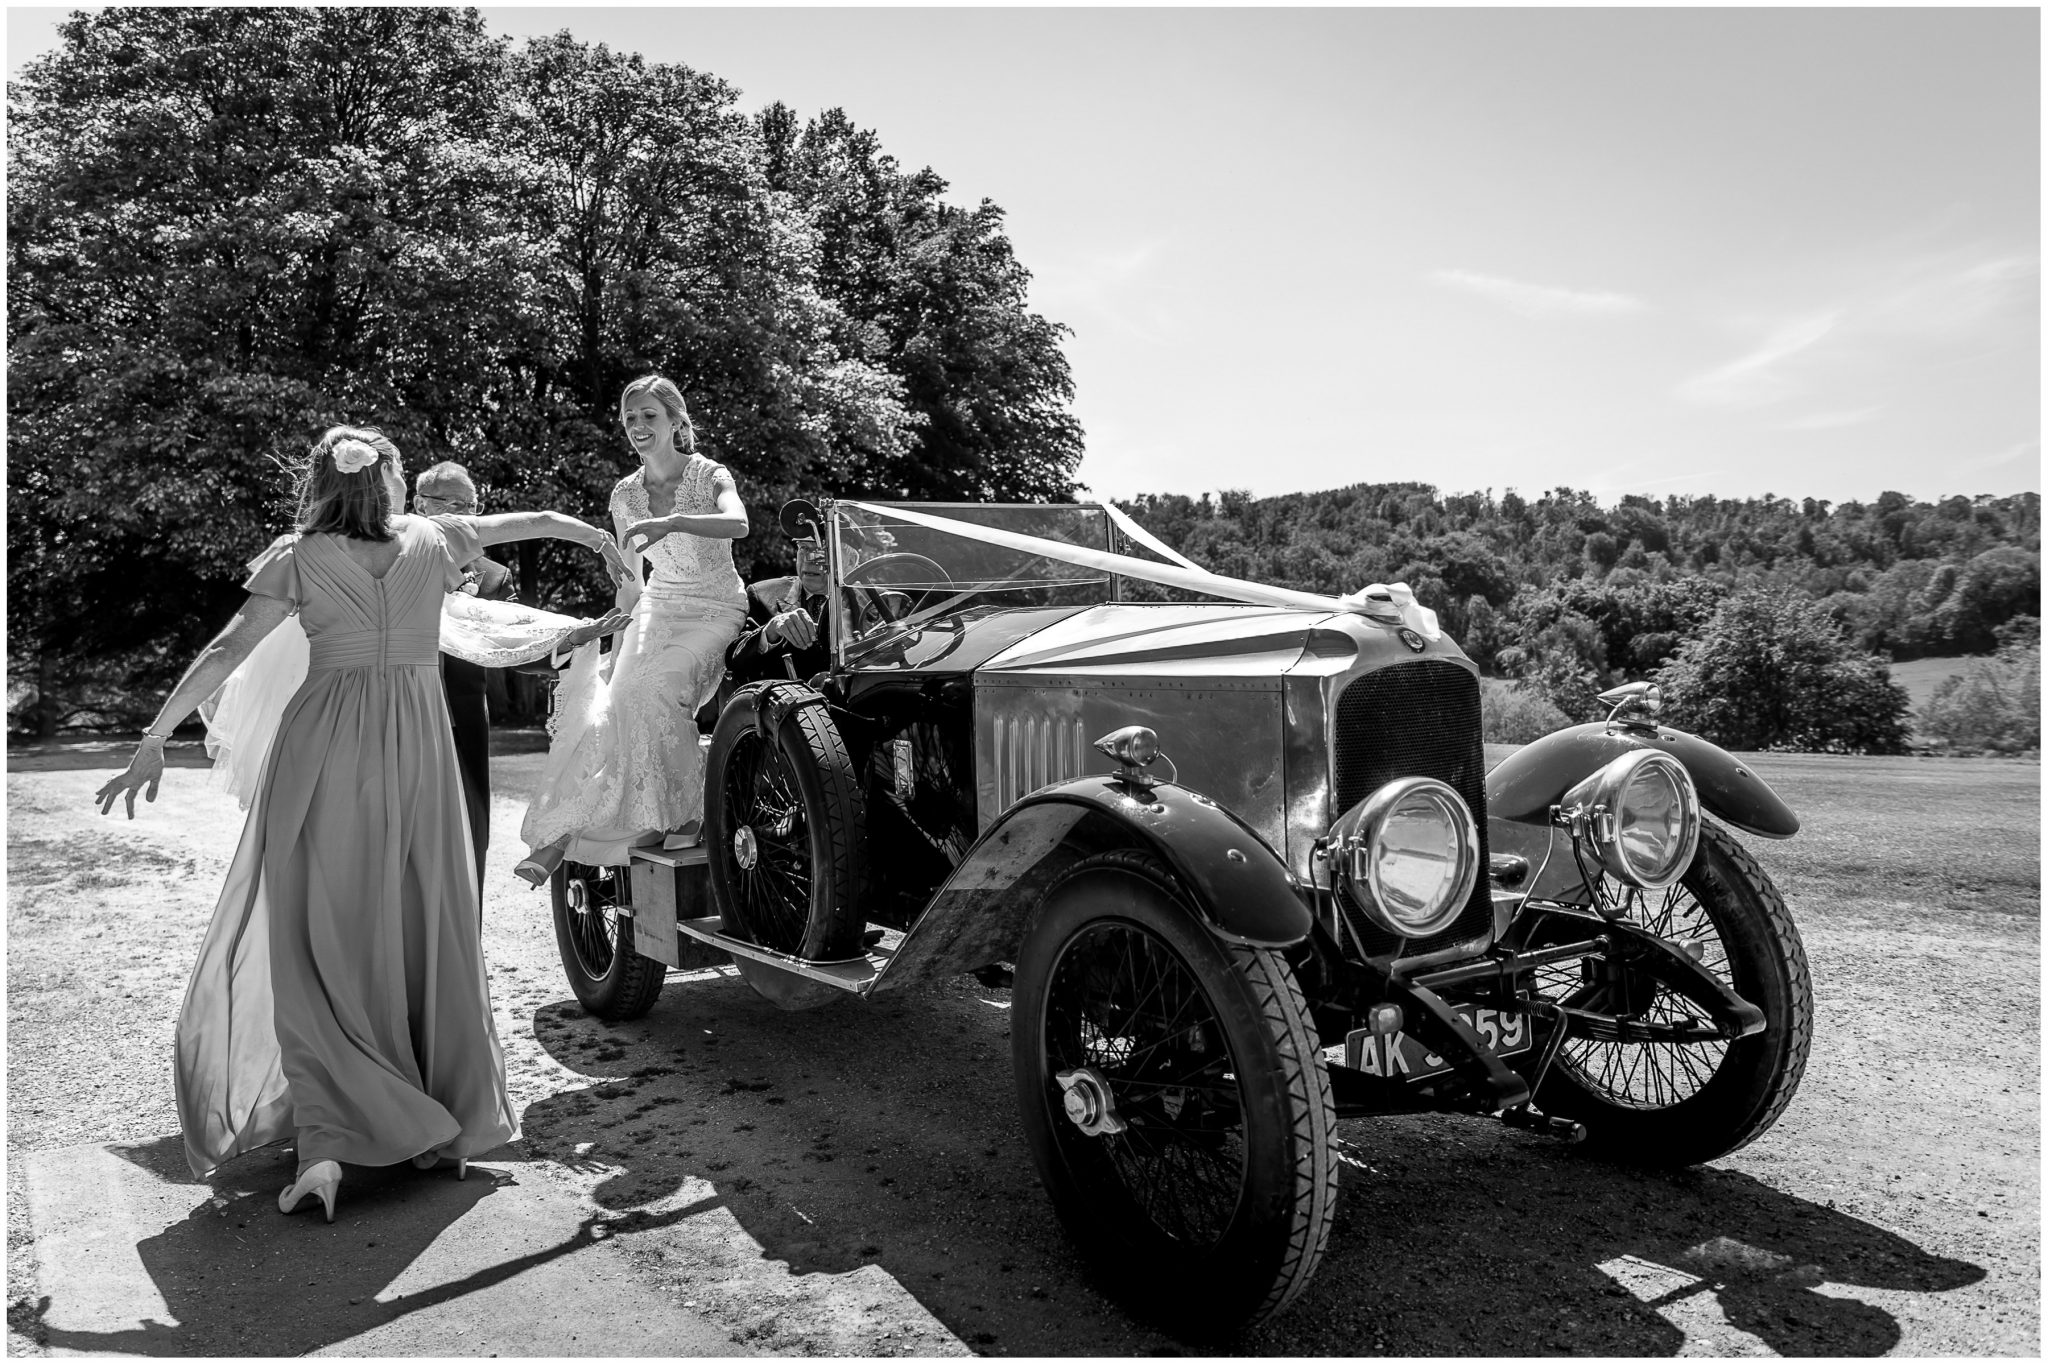 The bride arrives and steps out of the vintage wedding car